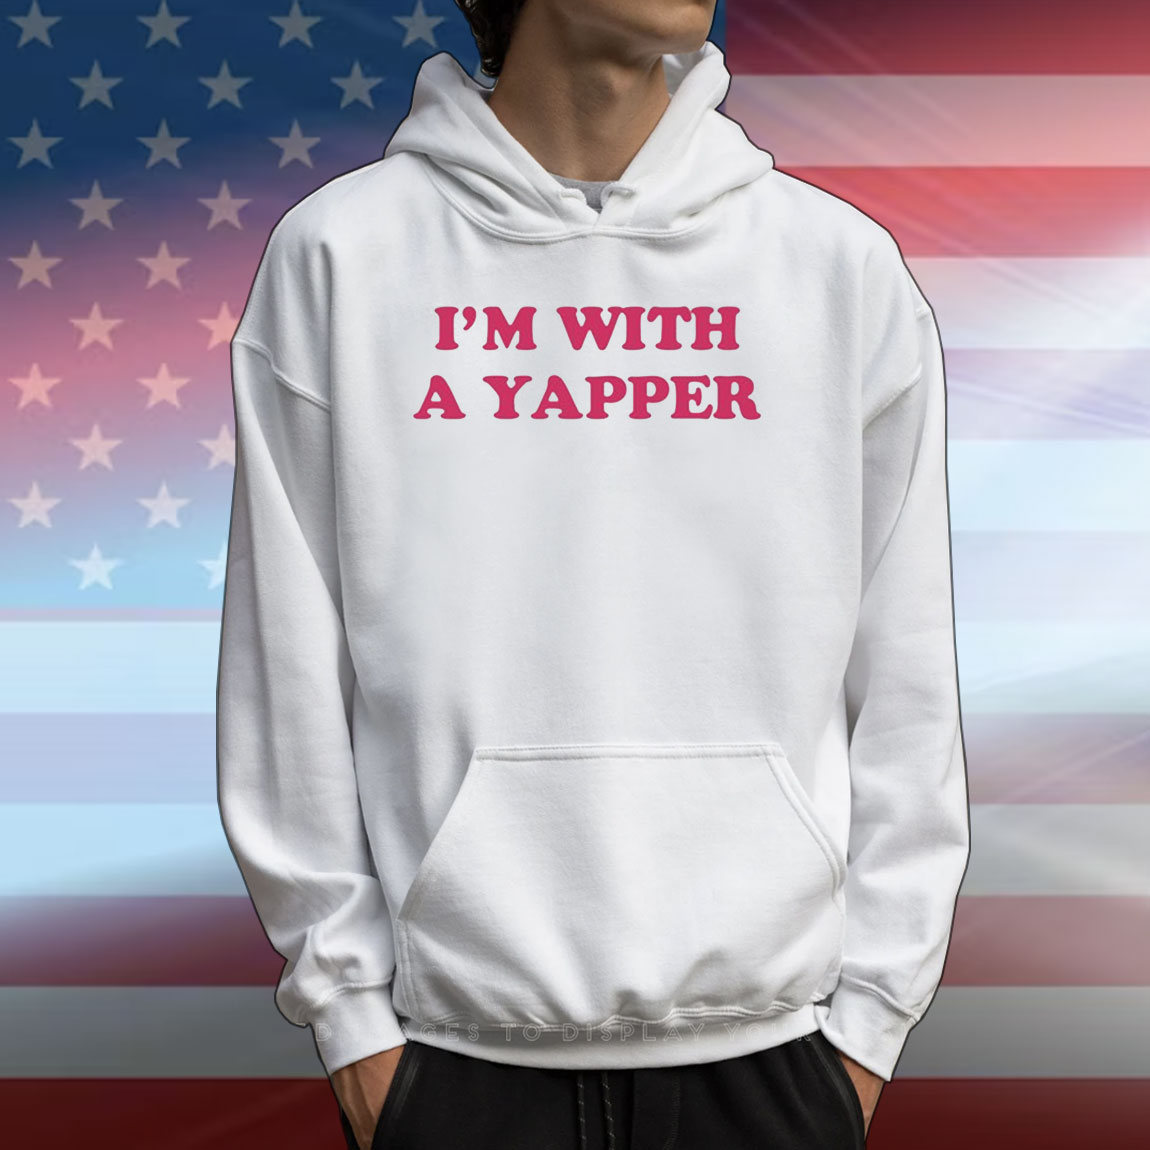 I'm With A Yapepr T-Shirts